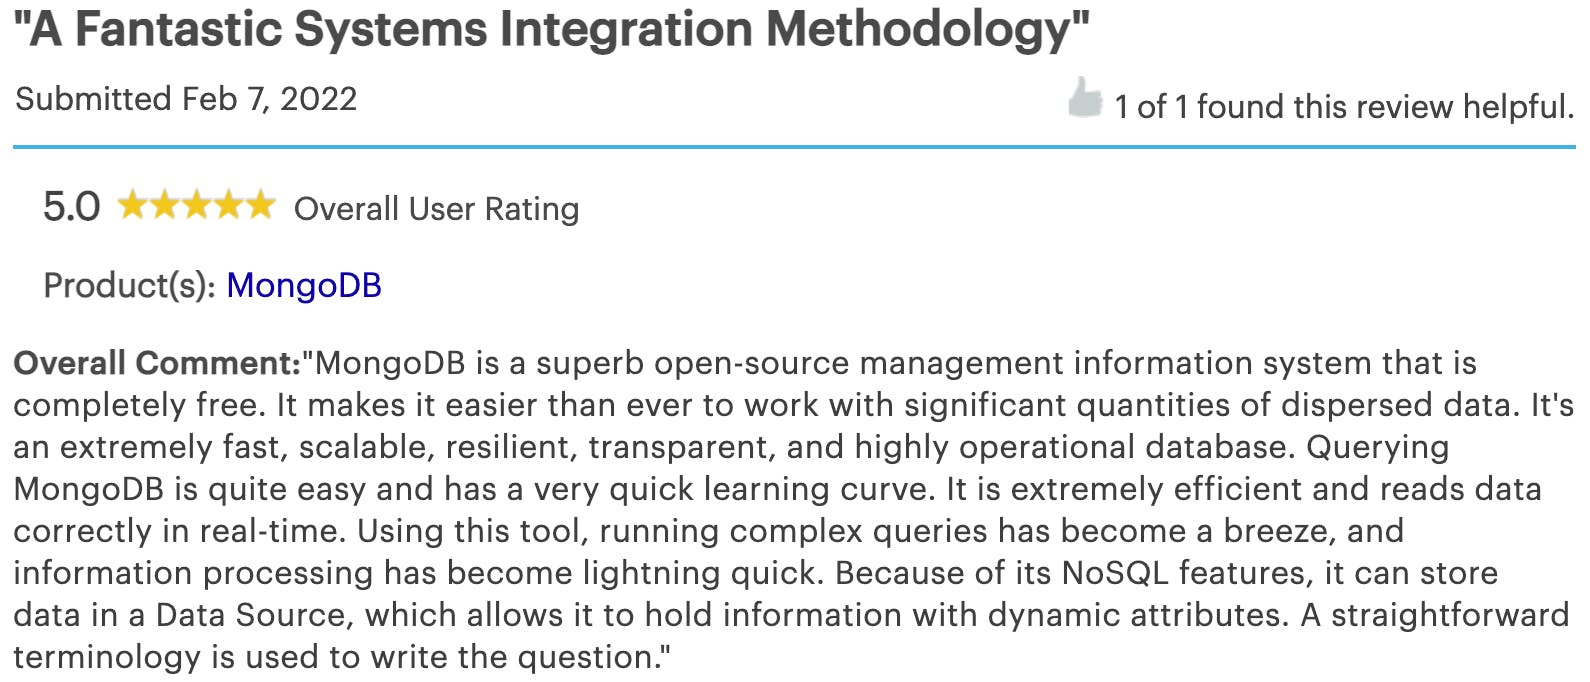 Customer review from an anonymous user providing MongoDB with a 5 star rating. The review reads as follows: MongoDB is a superb open-source management information system that is completely free. It makes it easier than ever to work with significant quantities of dispersed data. It's an extremely fast, scalable, resilient, transparent, and highly operational database. Querying MongoDB is quite easy and has a very quick learning curve. It is extremely efficient and reads data correctly in real-time. Using this tool, running complex queries has become a breeze, and information processing has become lightning quick. Because of its NoSQL features, it can store data in a Data Source, which allows it to hold information with dynamic attributes. A straightforward terminology is used to write the question.